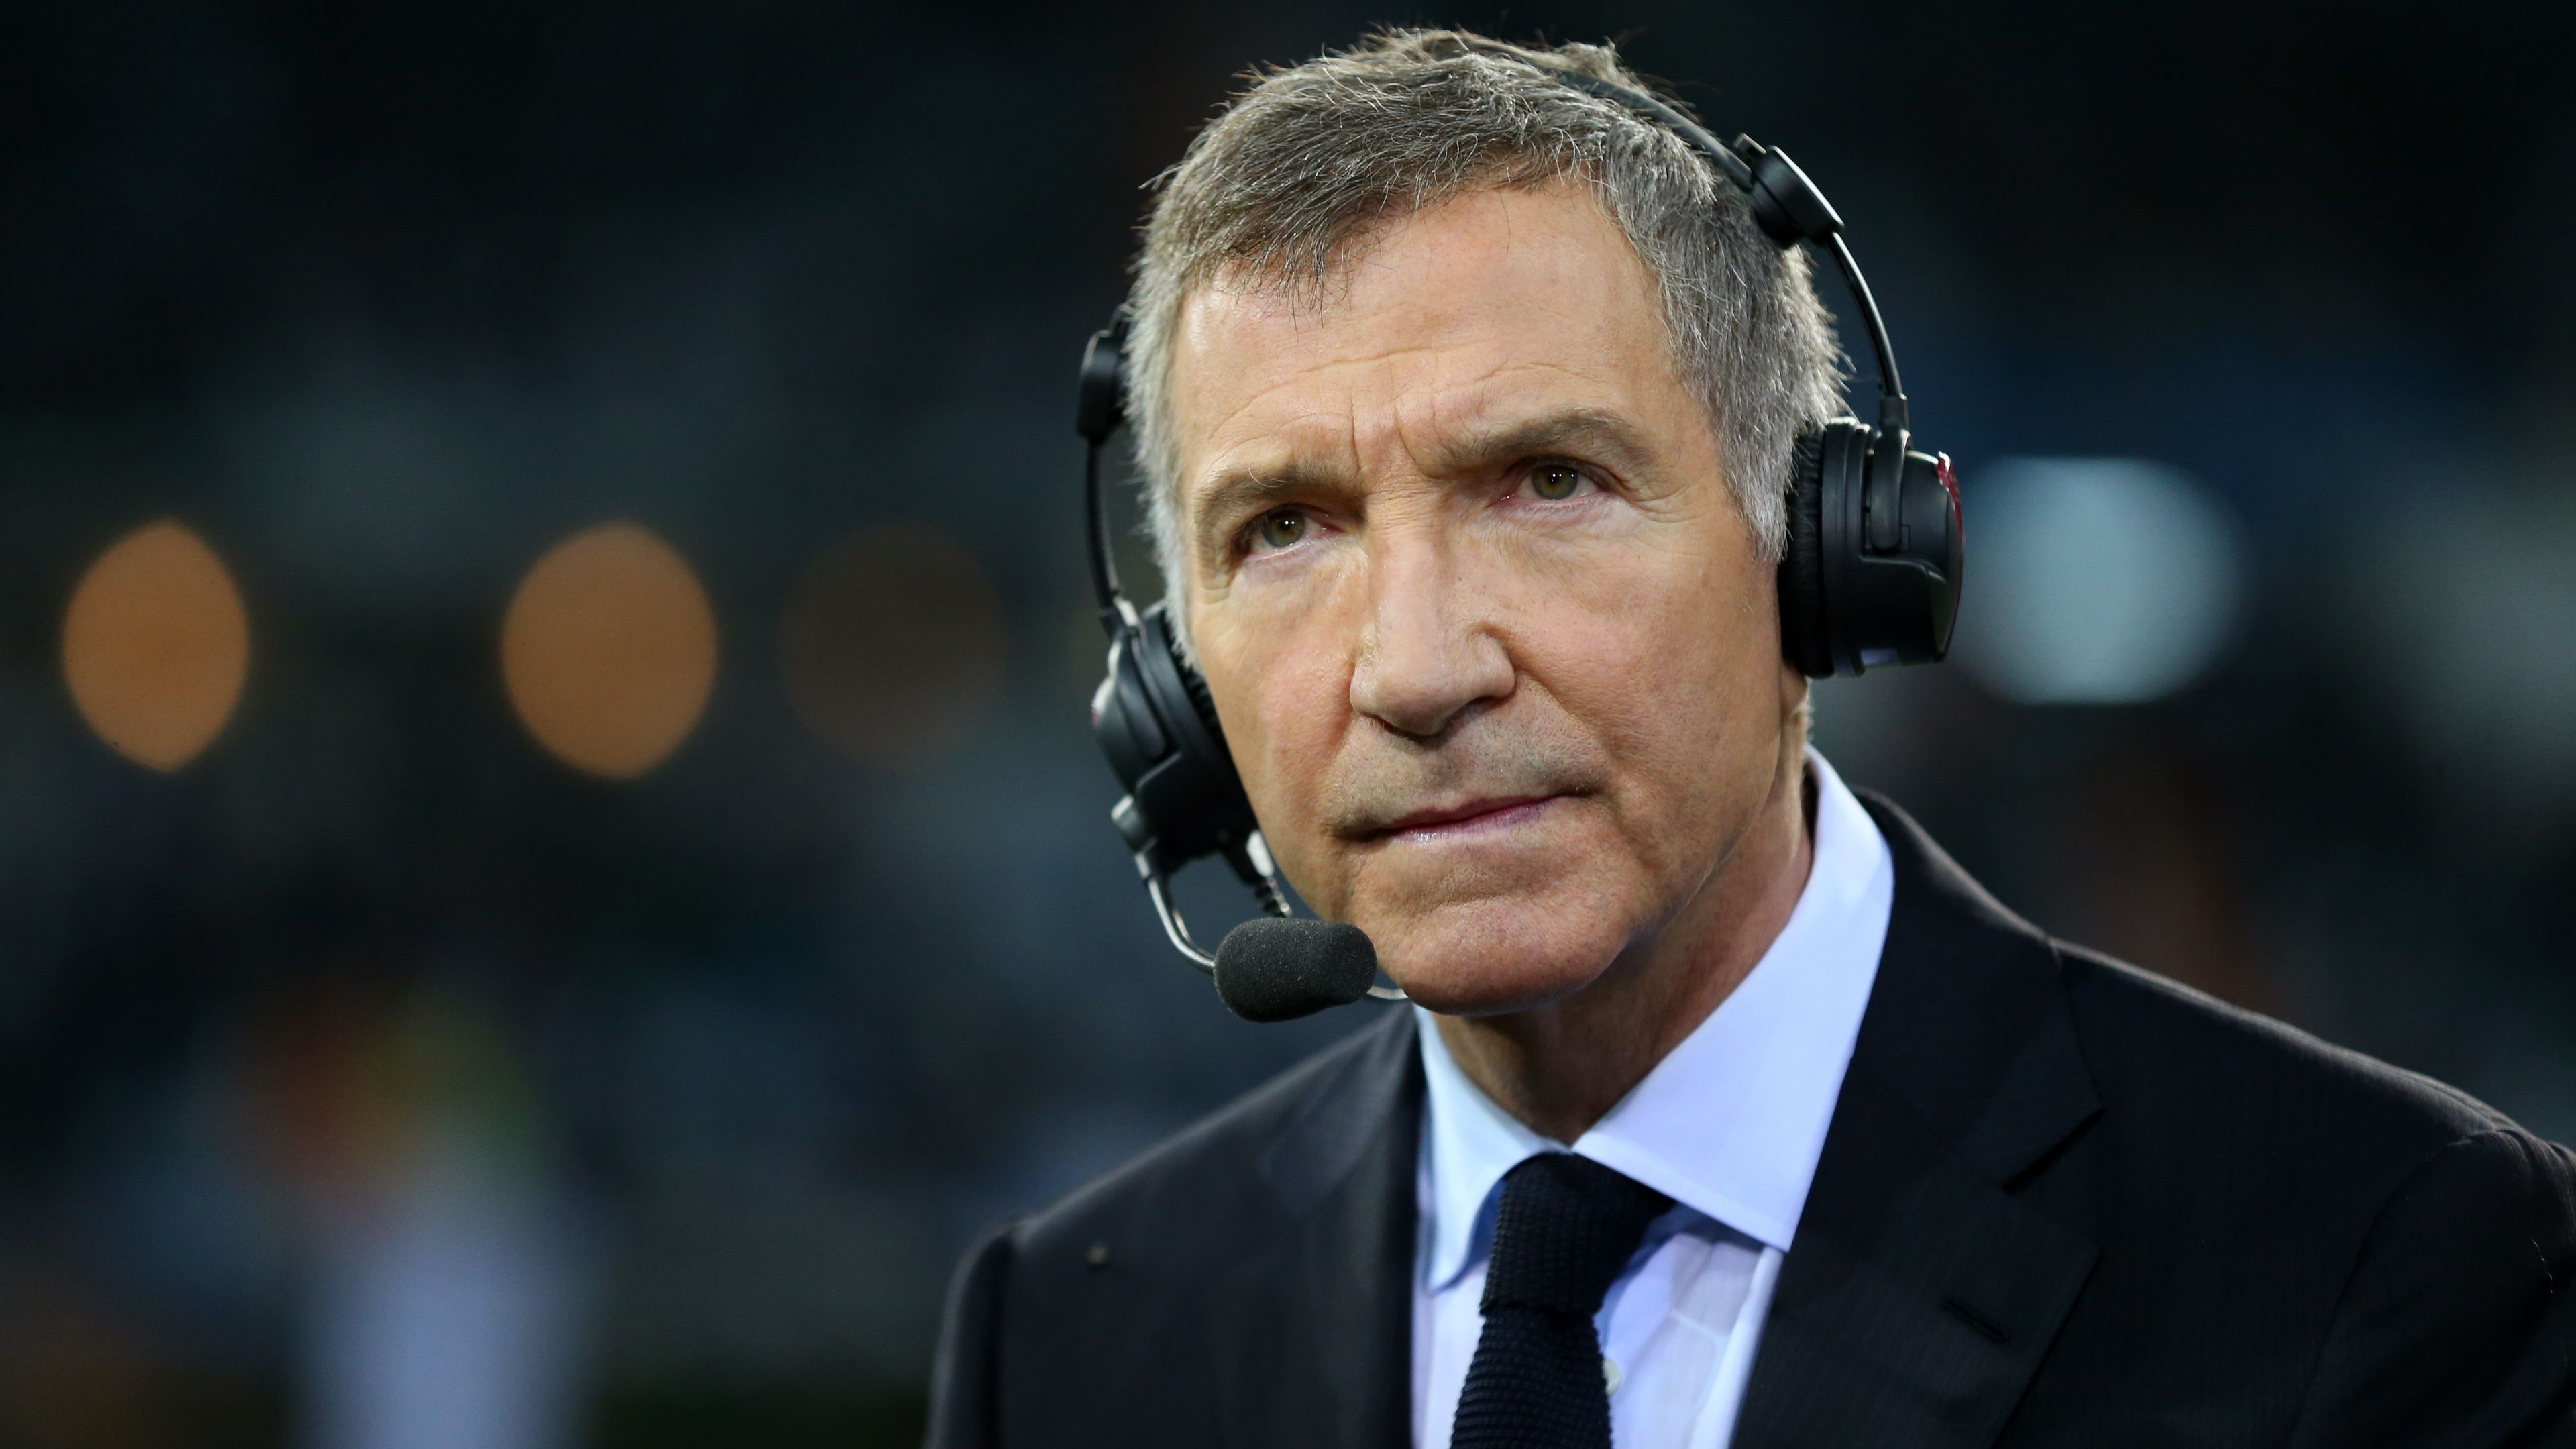 Liverpool legend Graeme Souness counters claims of gender discrimination after 'man's game' comment backfires